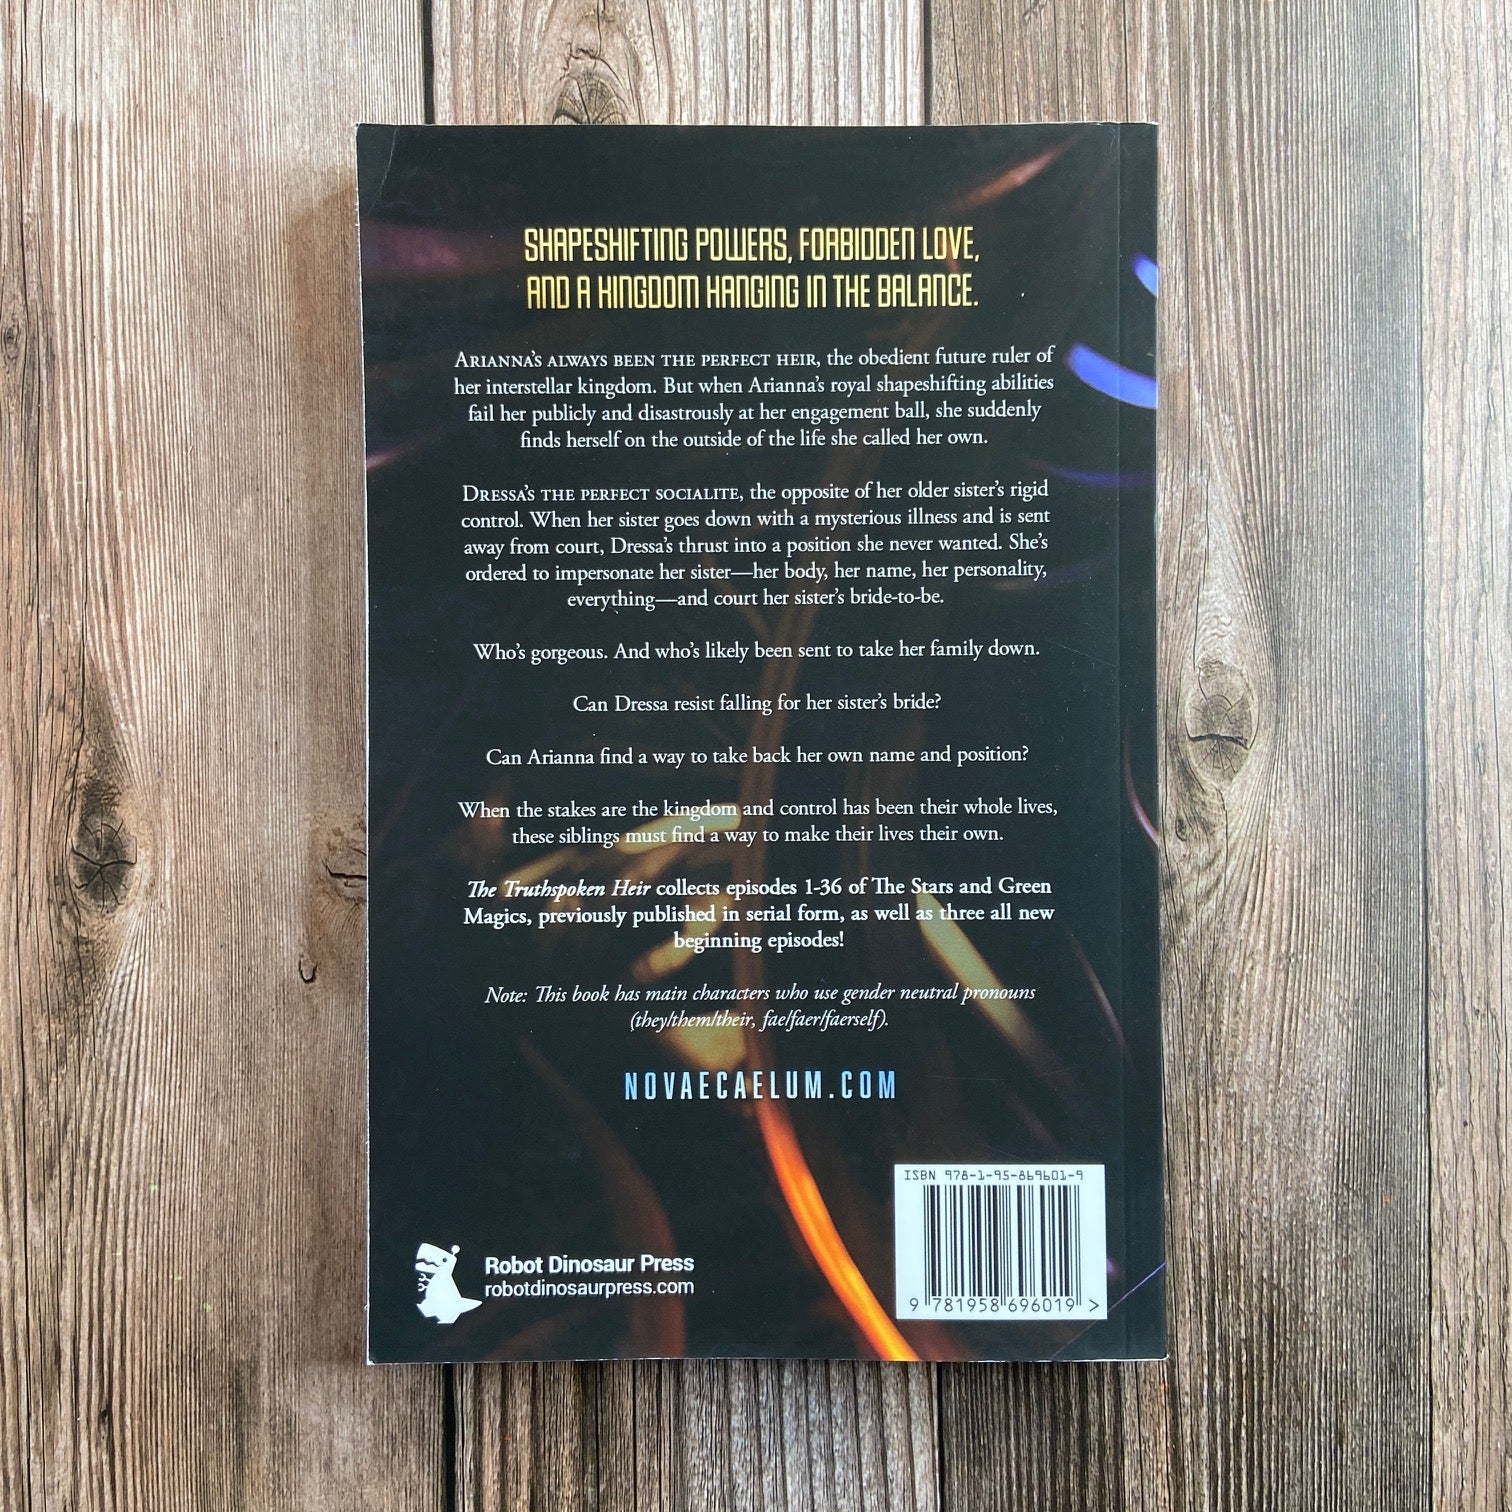 Back cover of a Novae Caelum SCRATCH AND DENT - SIGNED The Truthspoken Heir: The Stars and Green Magics Book 1 (Paperback) displayed on a wooden surface, featuring a synopsis and publisher information.